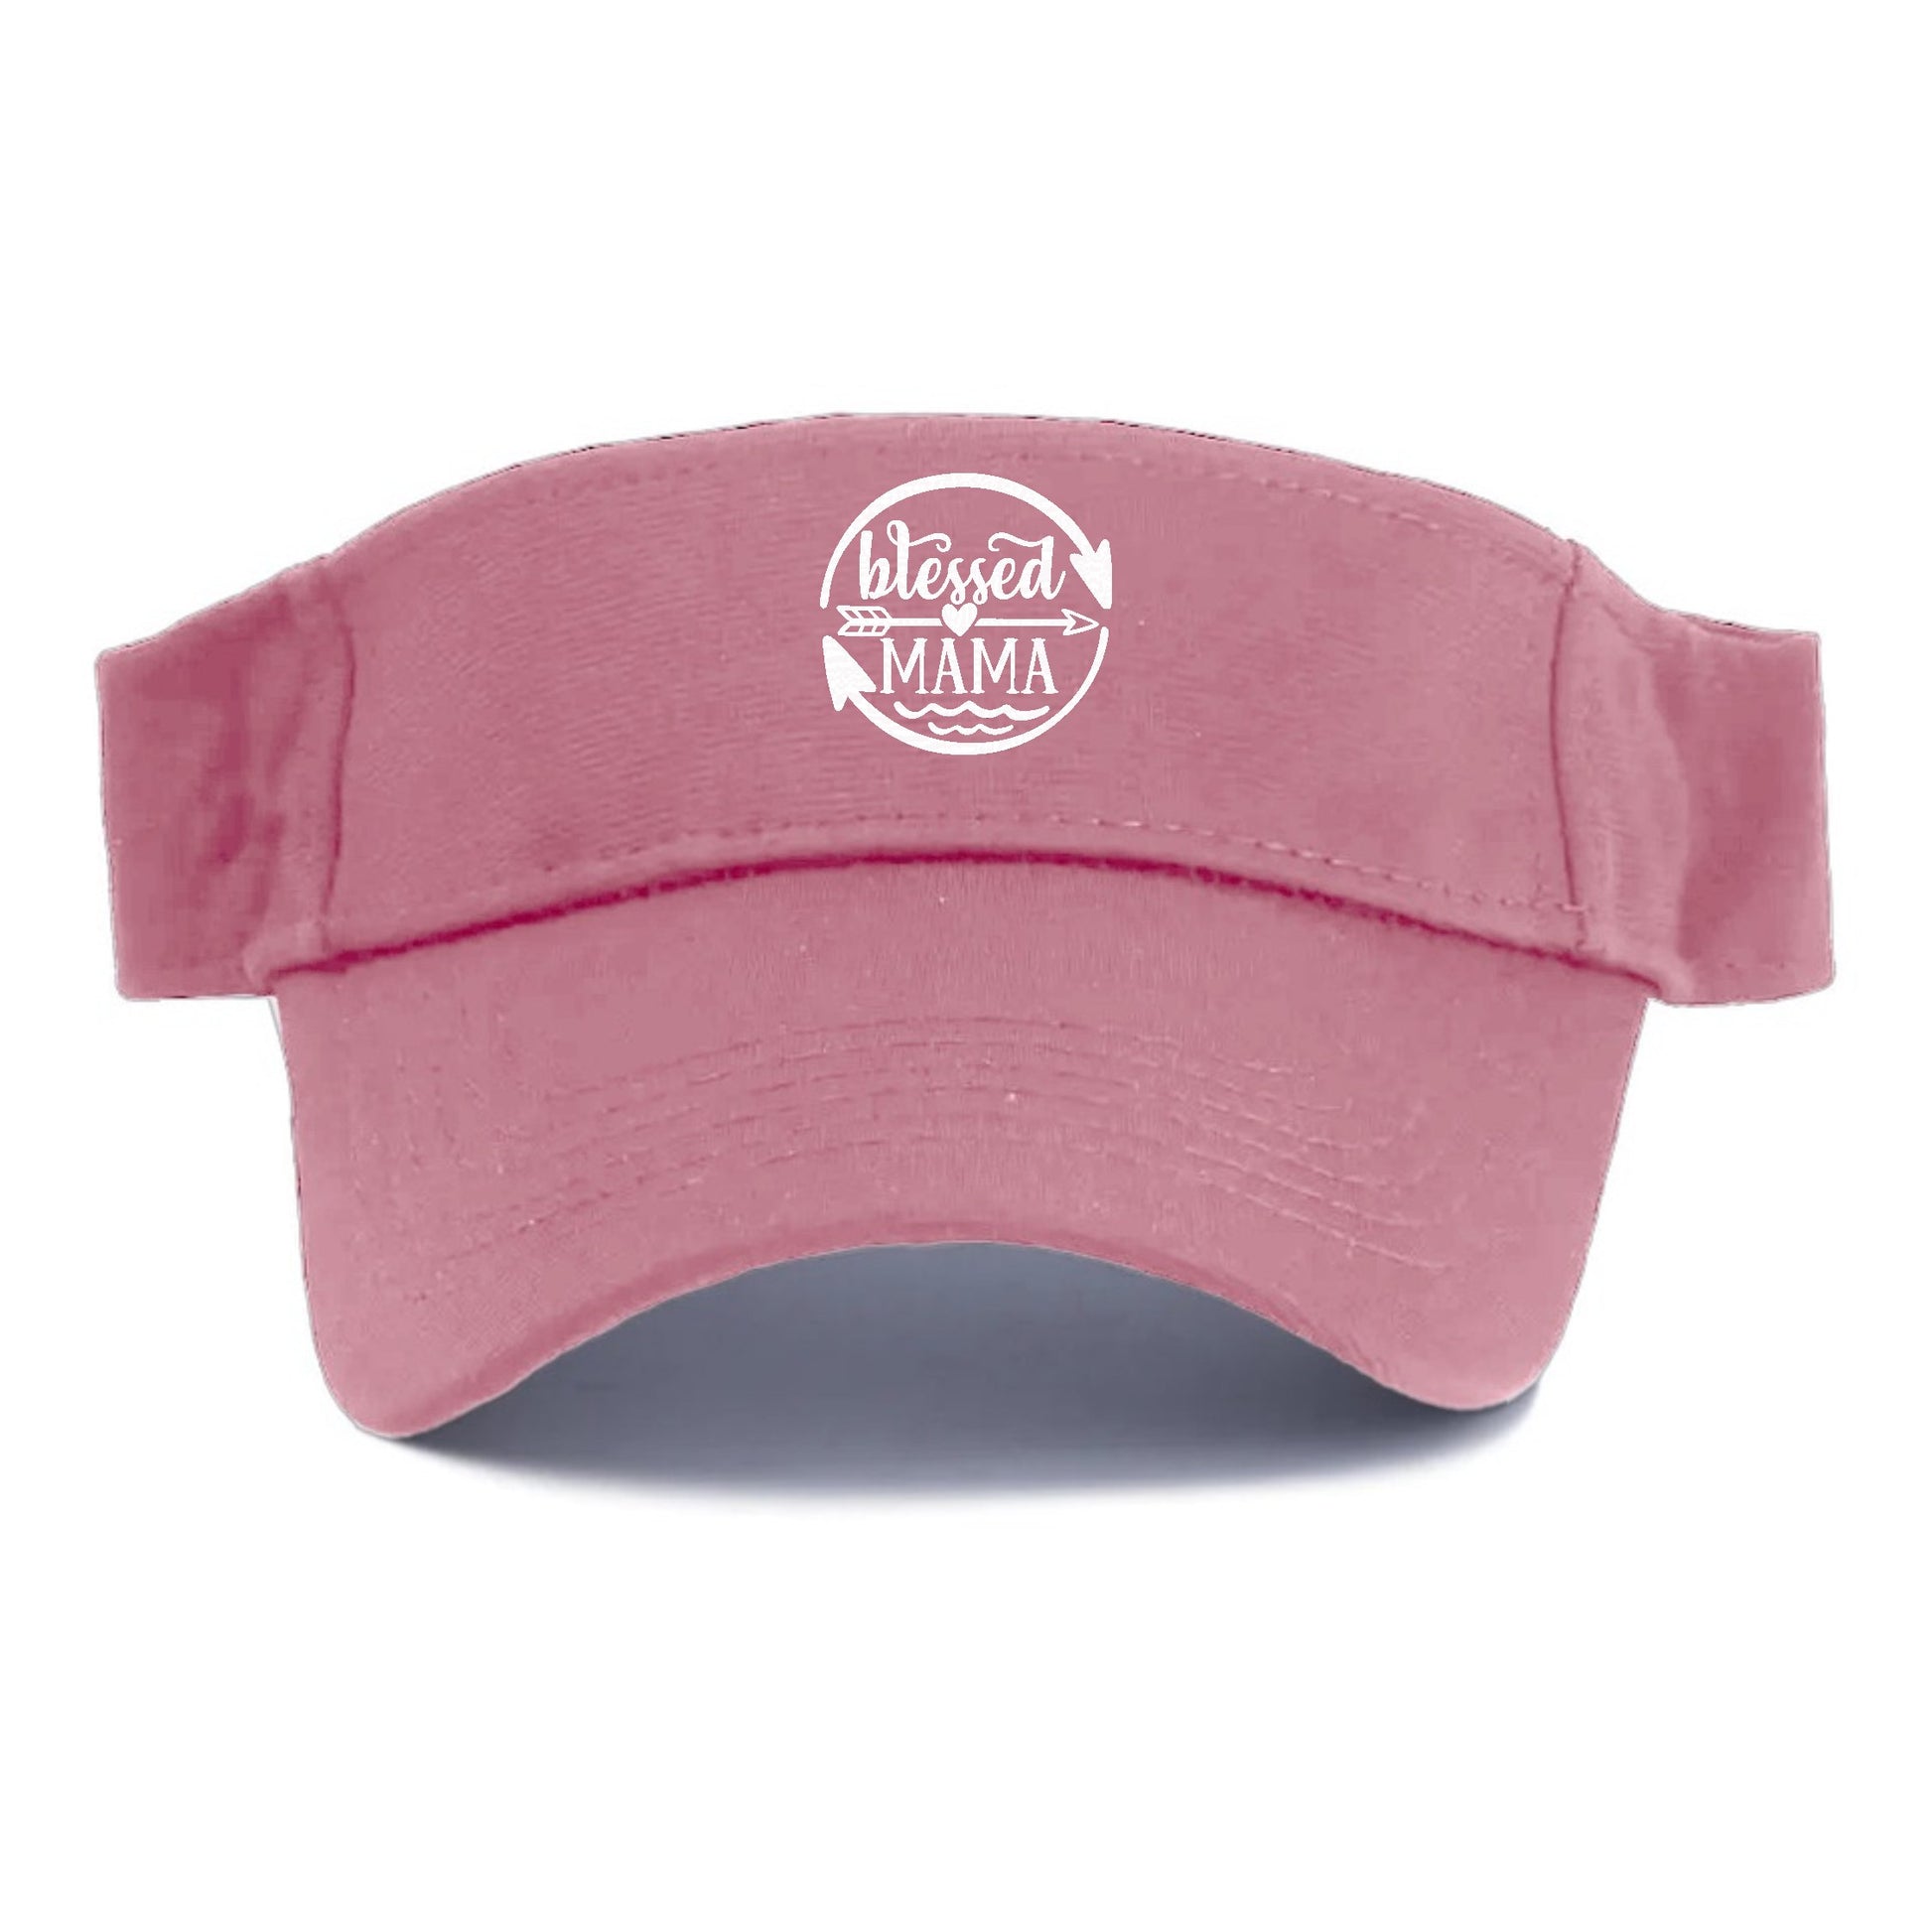 Blessed mama Hat